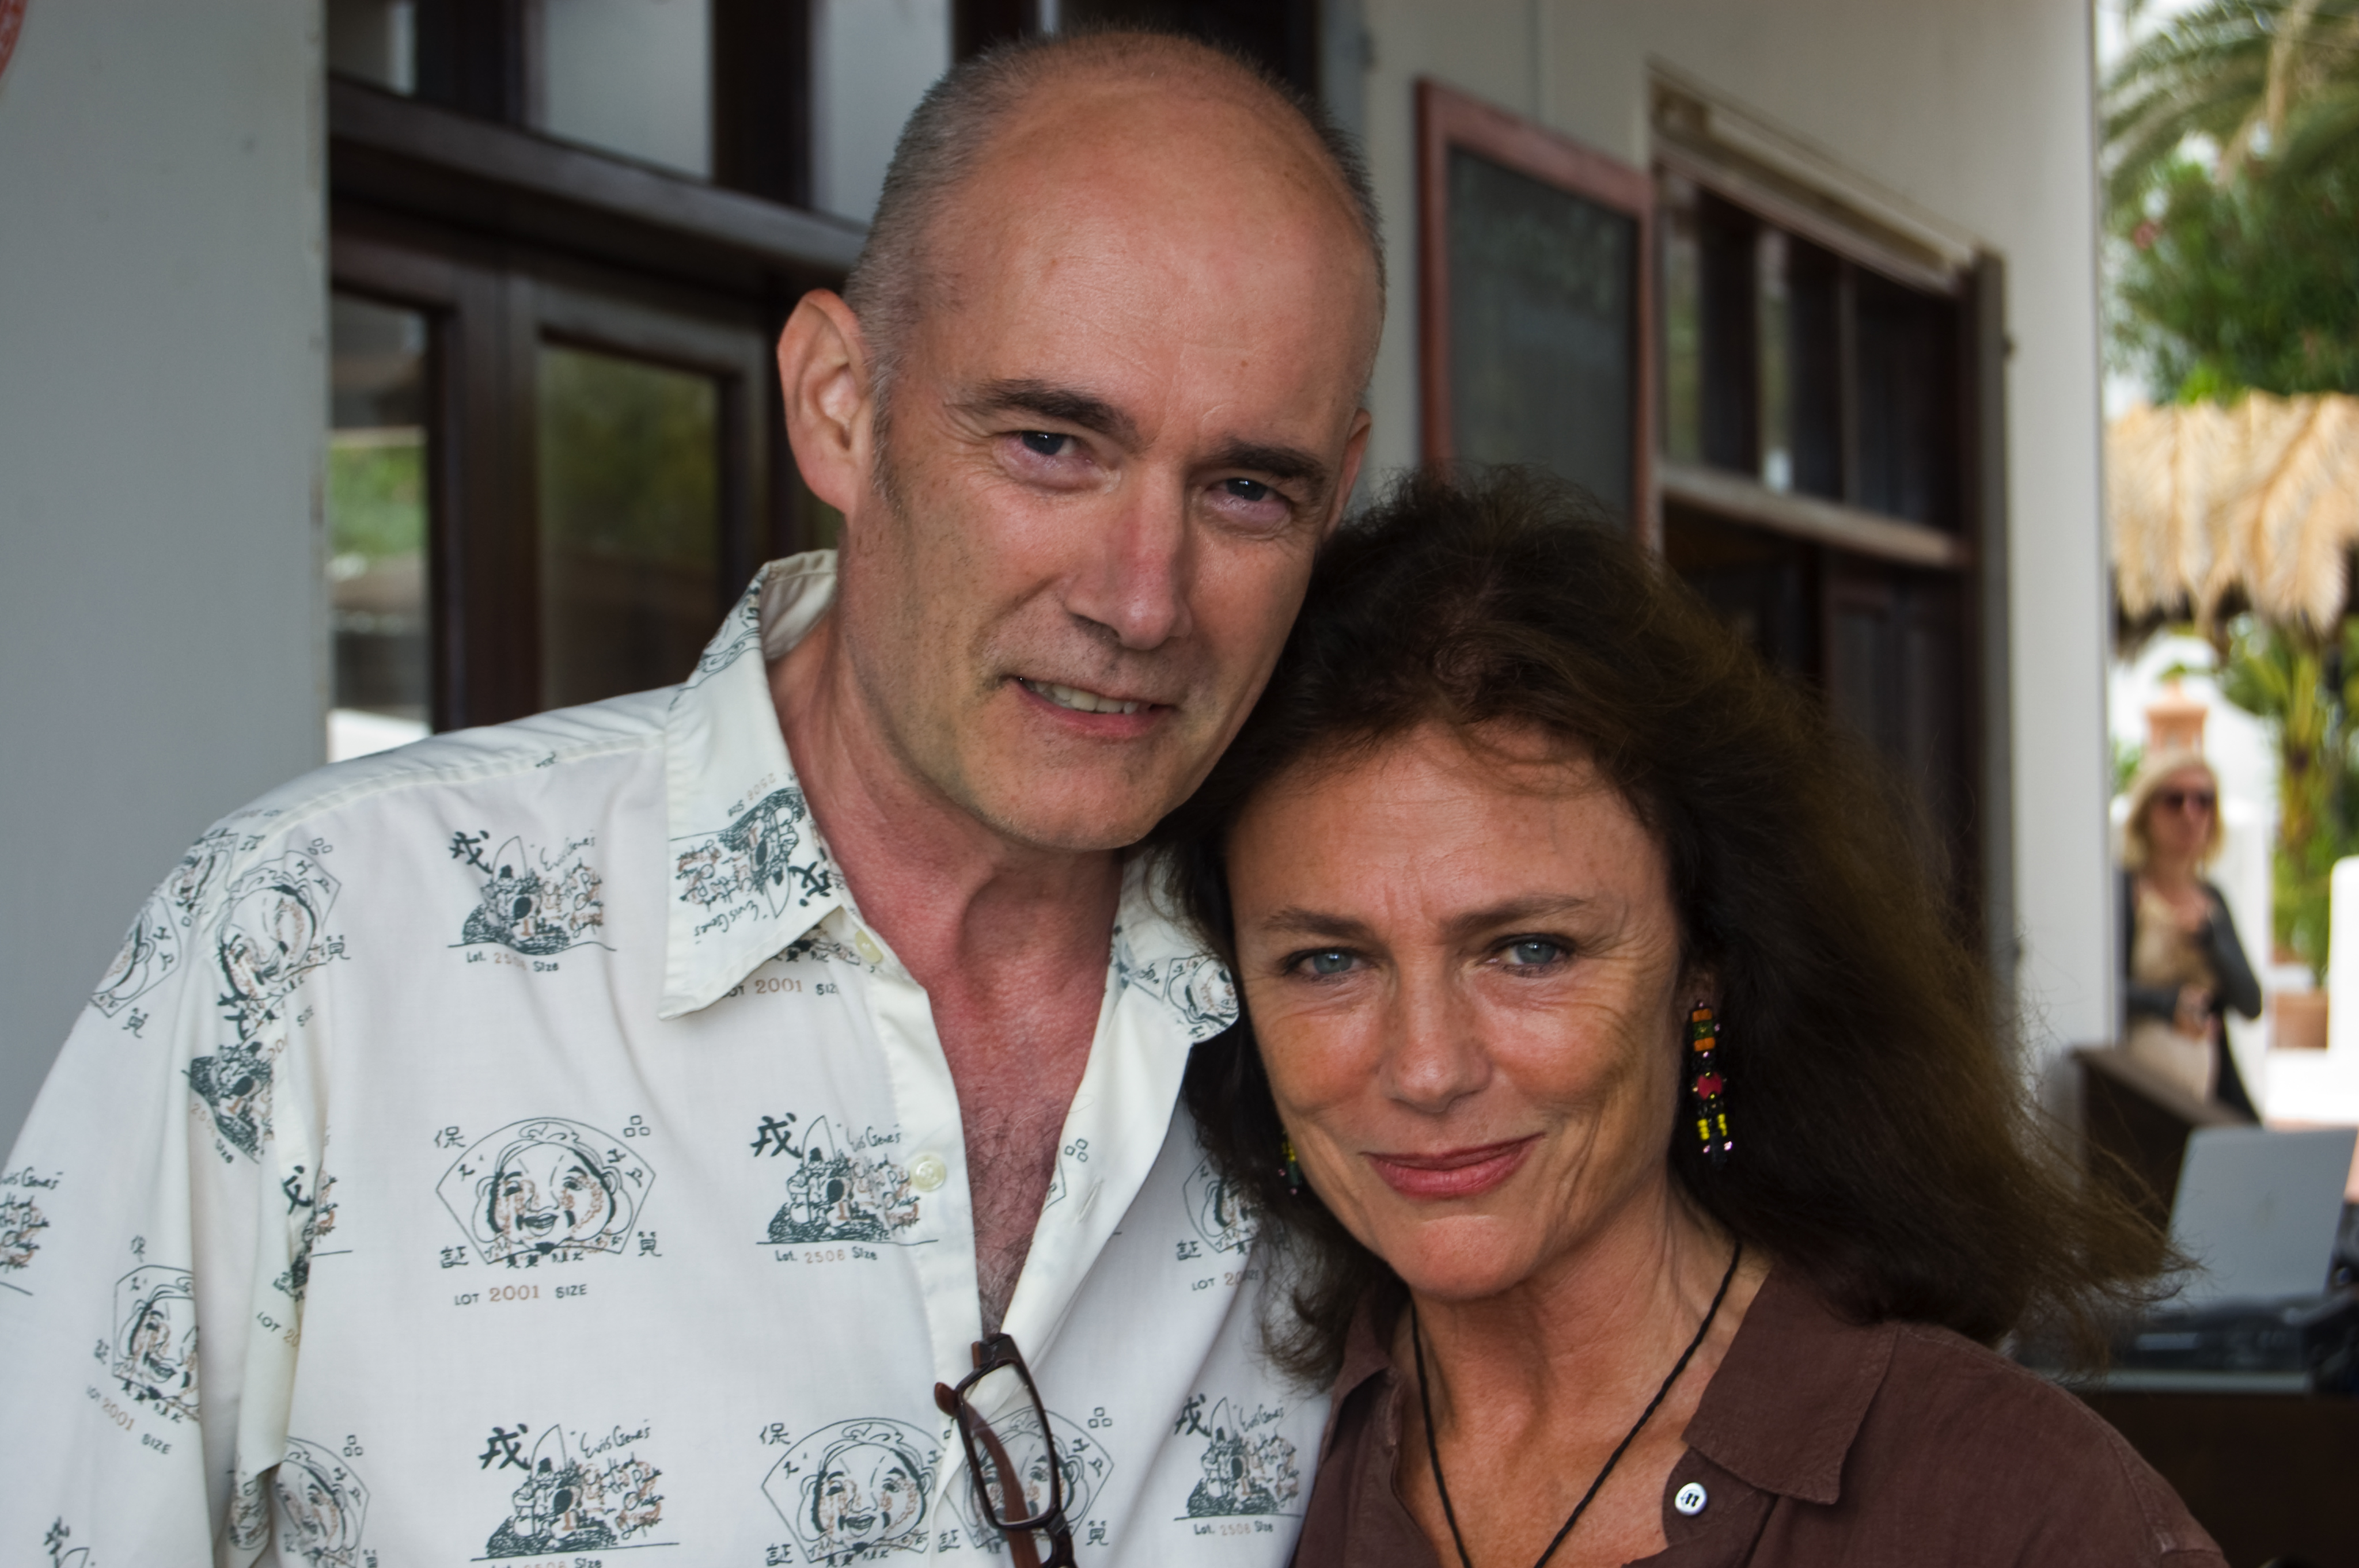 Ian Vernon and Jacqueline Bisset at the Ibiza Film Festival.